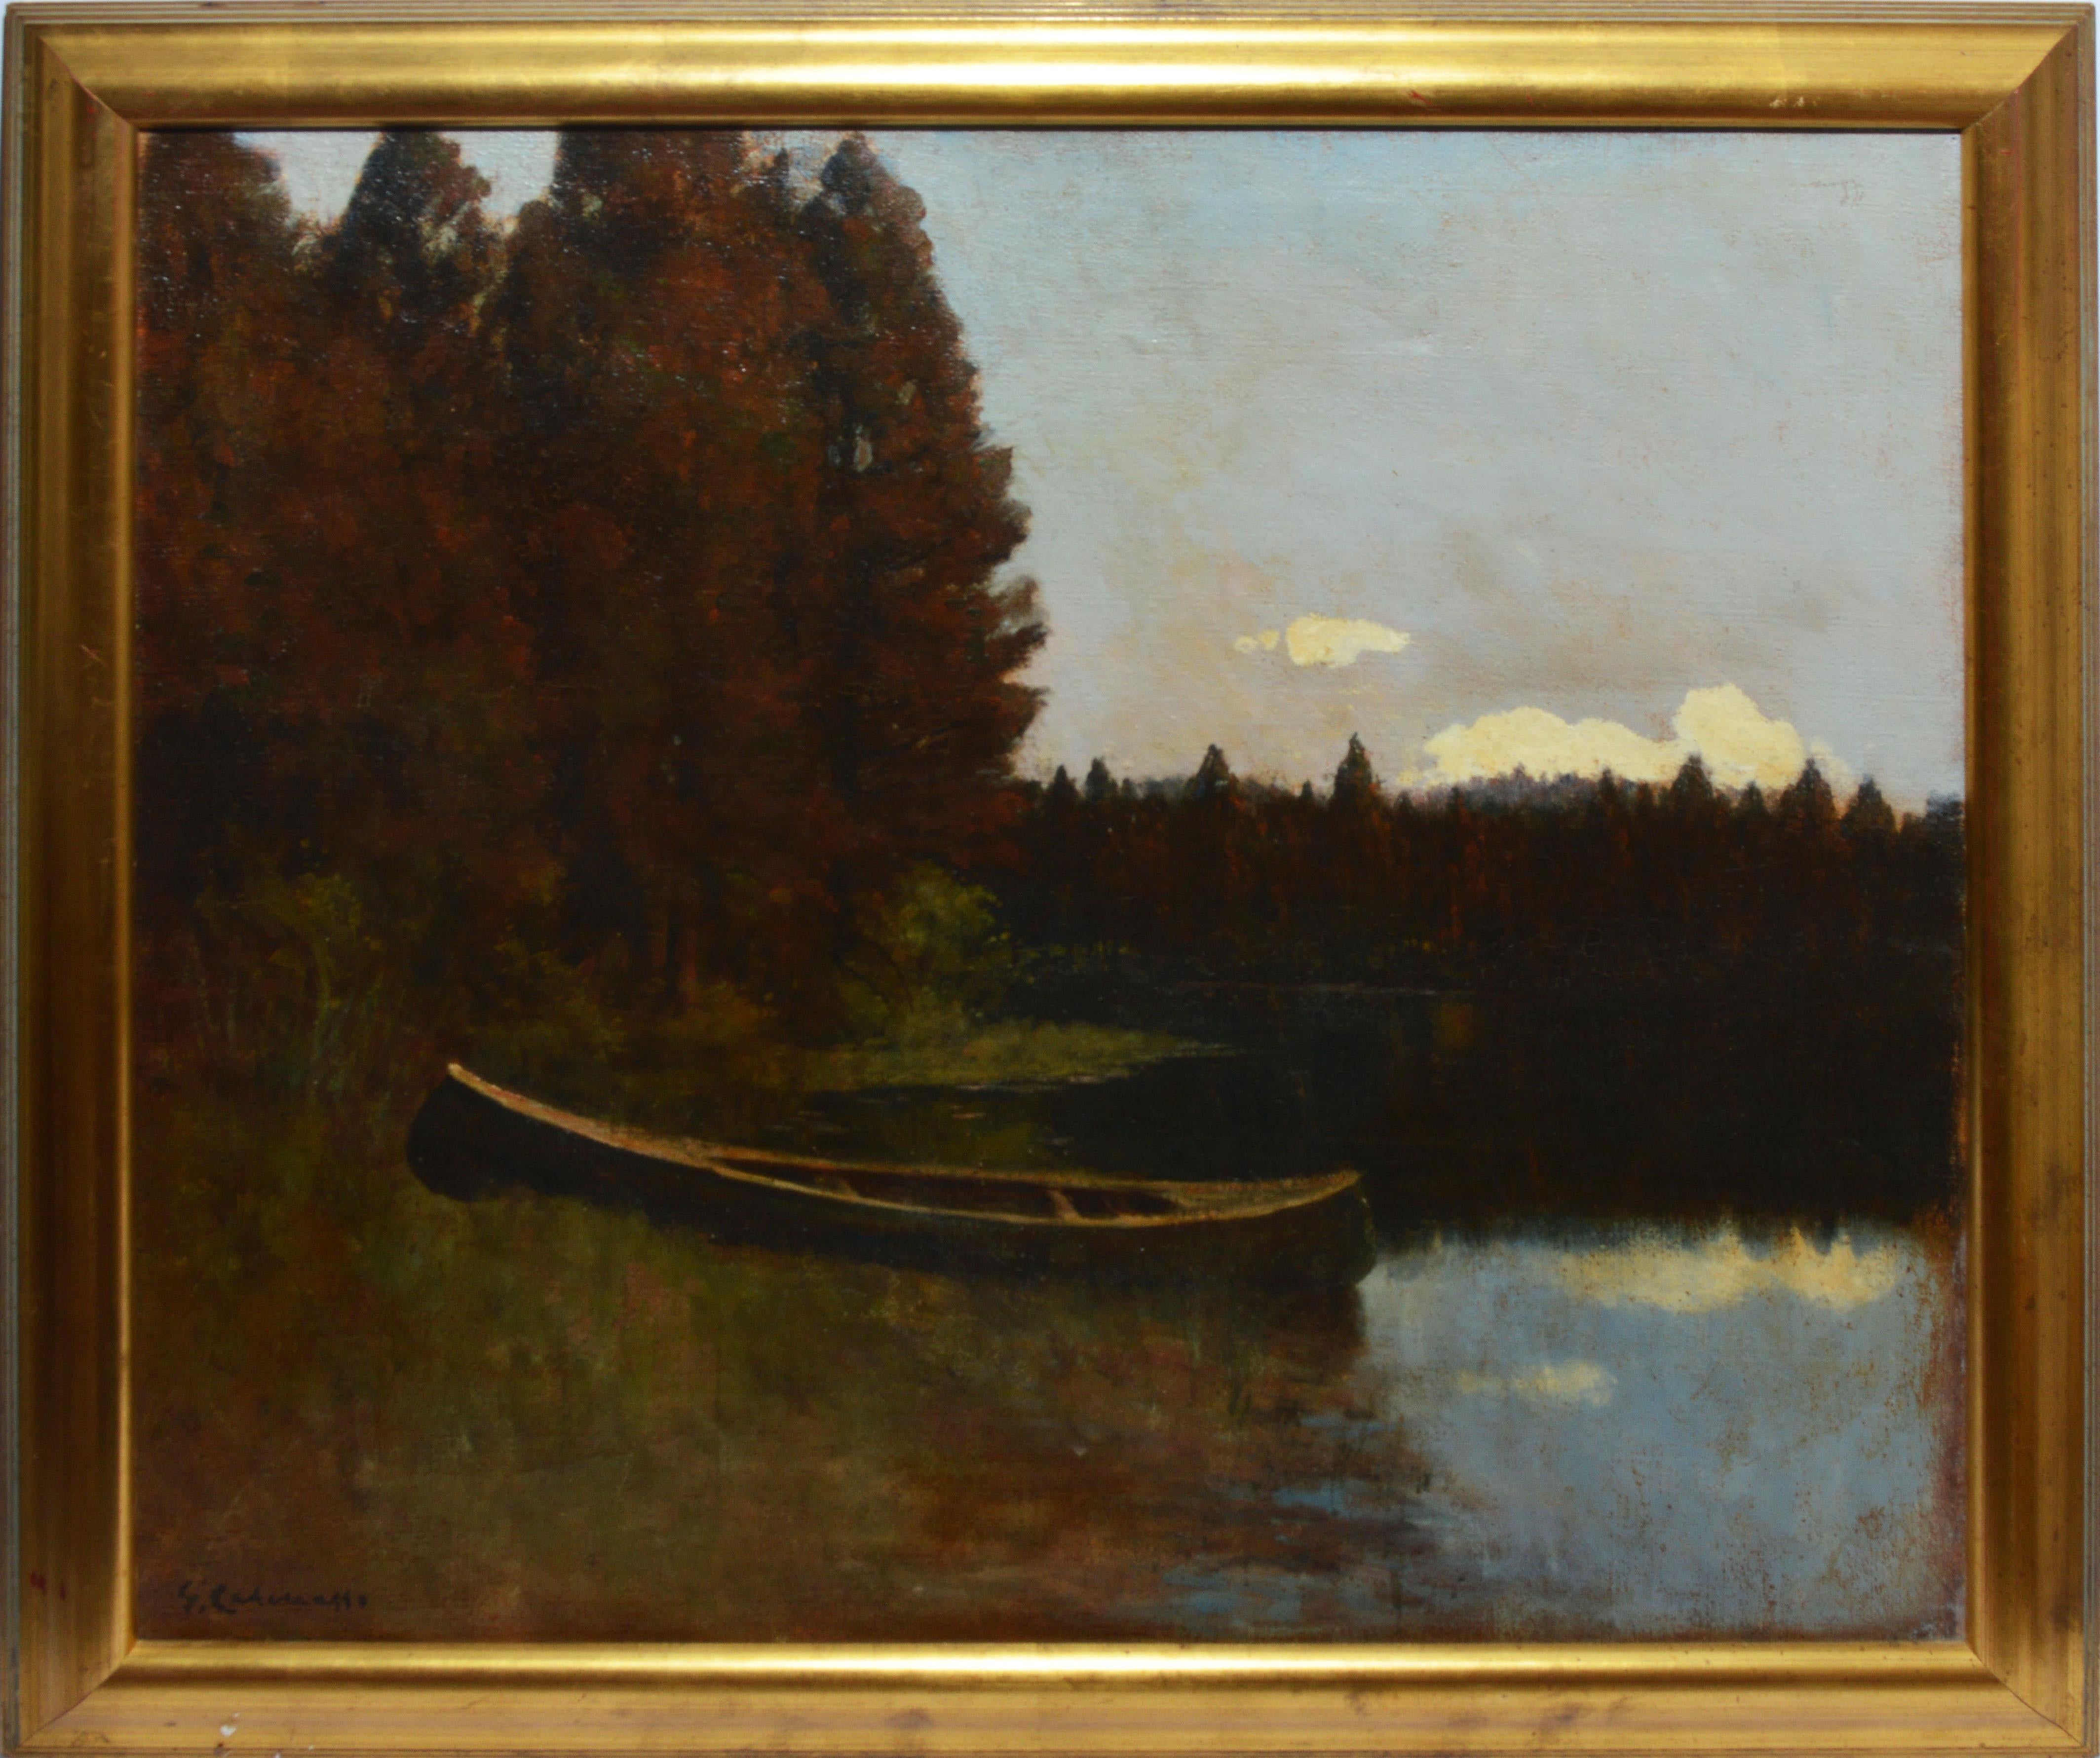 Impressionist view of the Russian River in California by Giuseppe Cadenasso  (1858 - 1918).  Oil on canvas, circa 1900.  Signed.  Displayed in a giltwood frame.  Partial exhibition label remains verso.  Image, 30"L x 28"H, overall 34"L x 30"H.